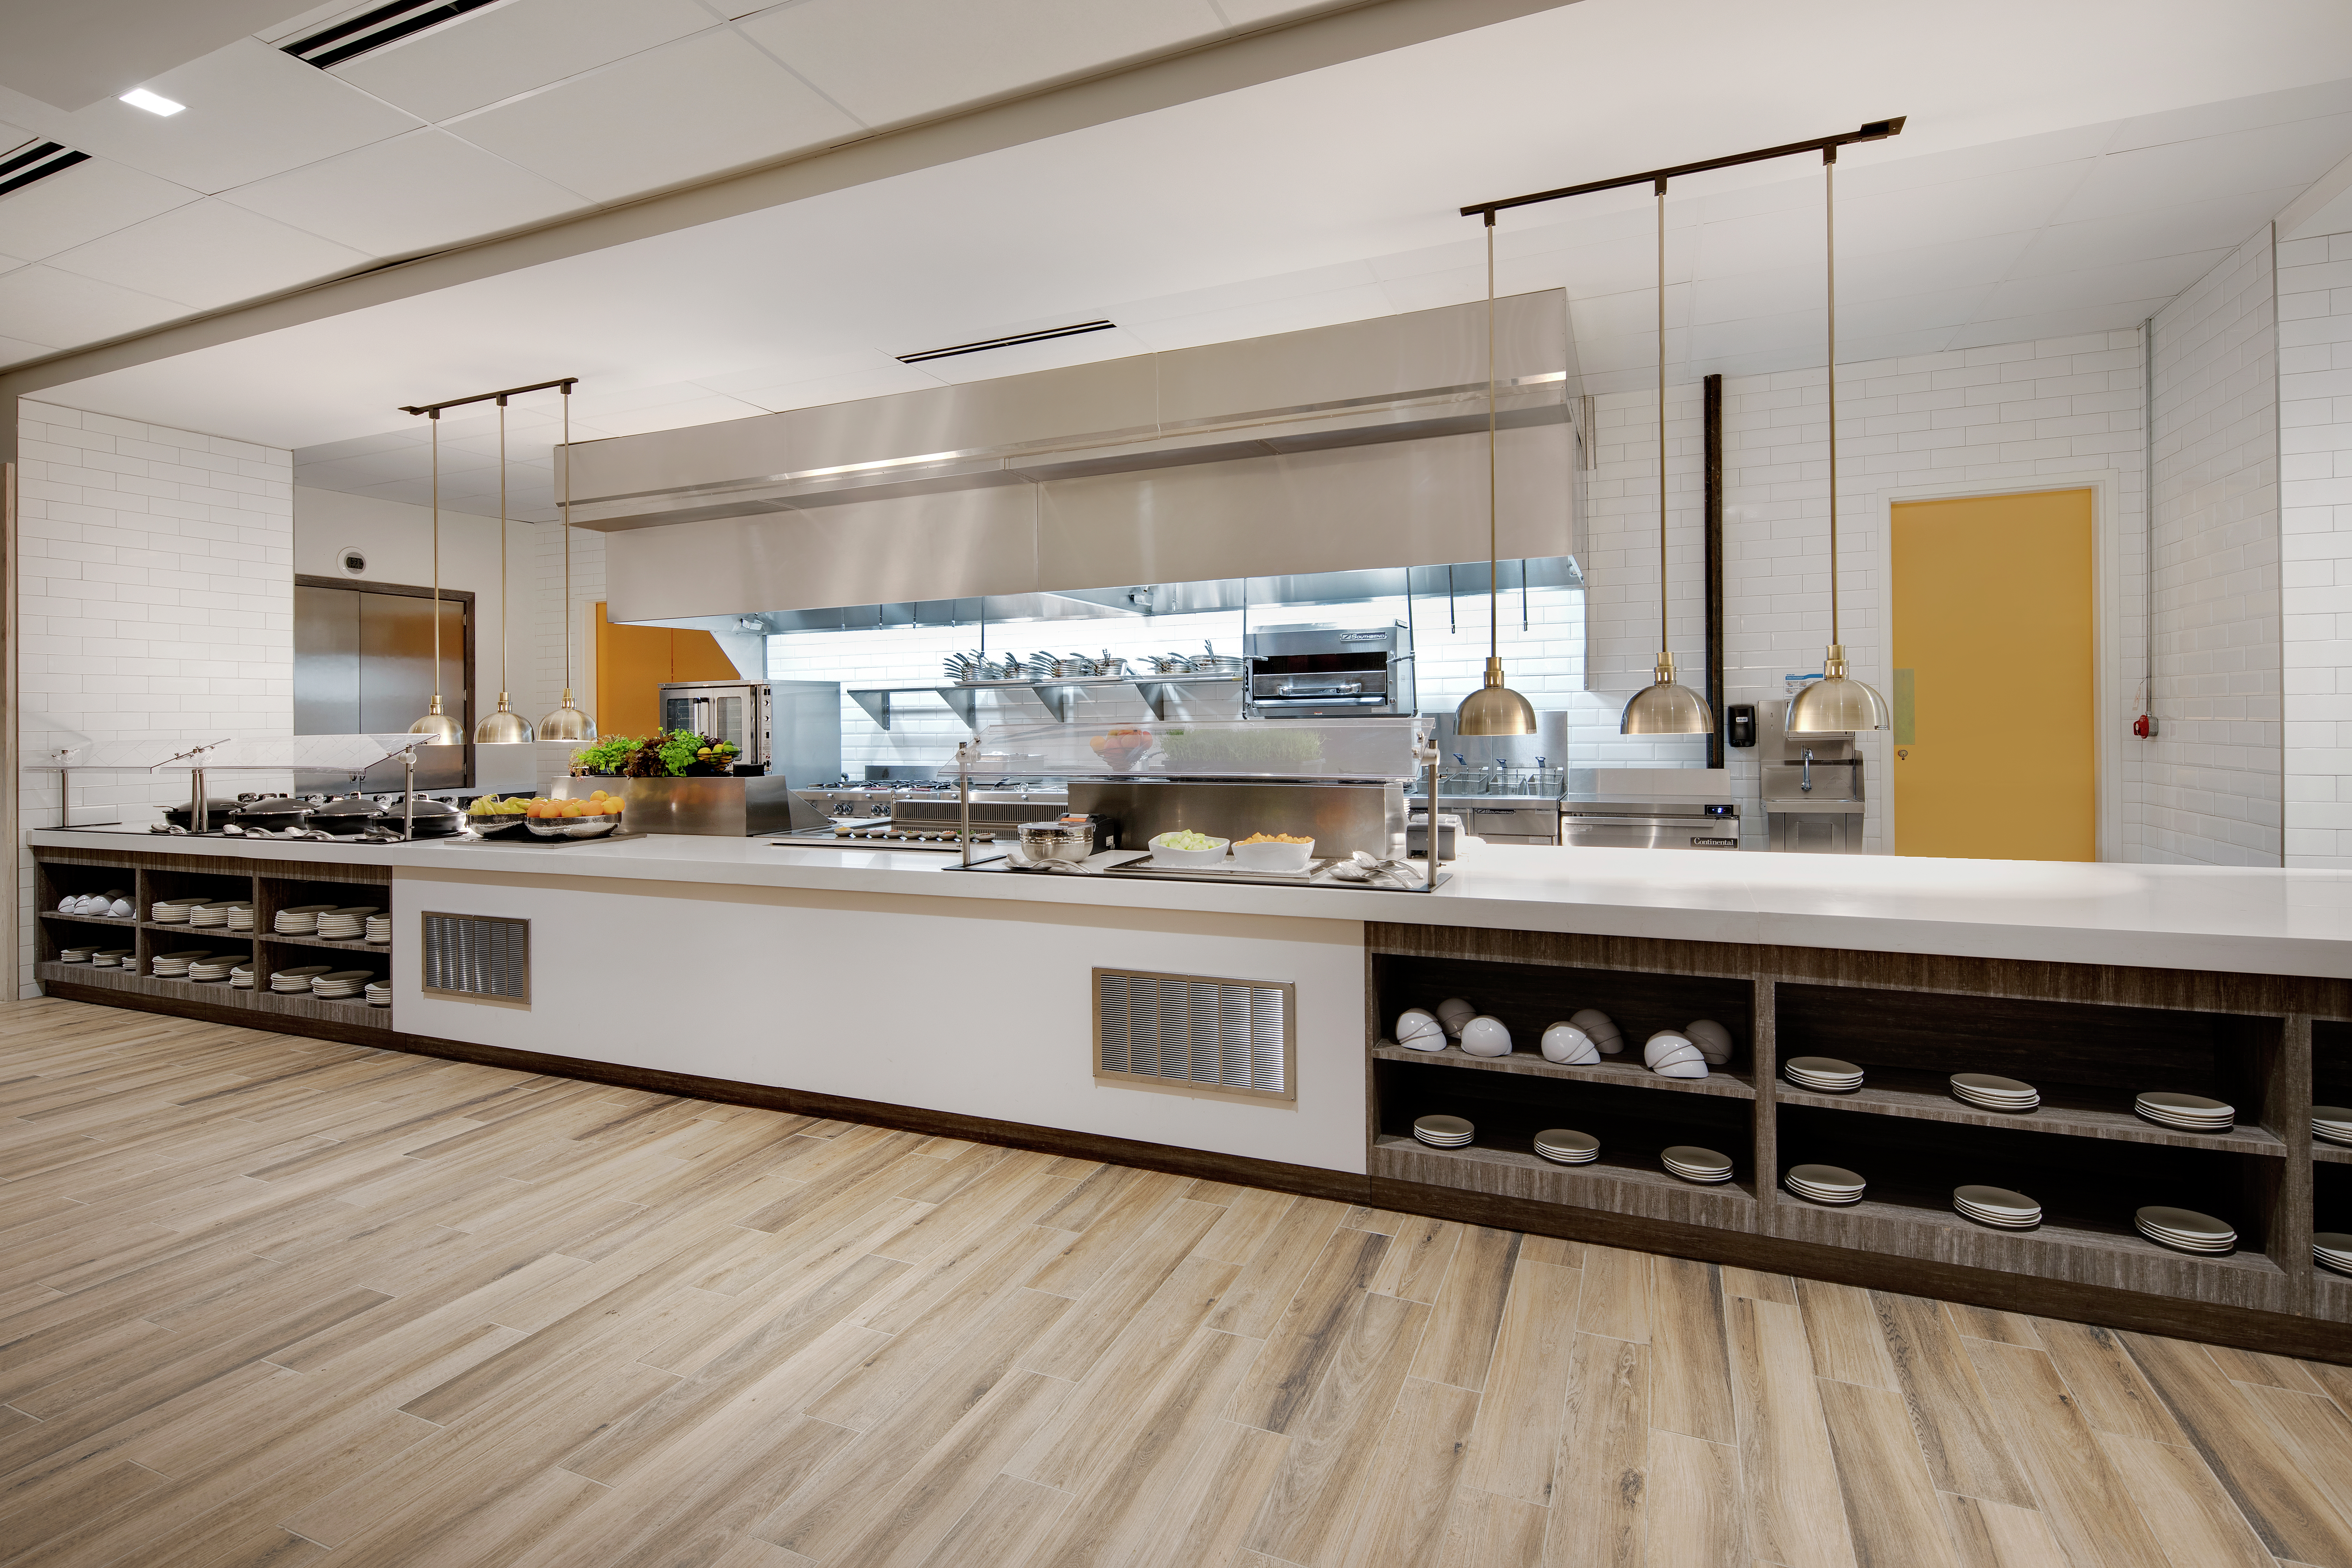 View of Kitchen and Hot Food Bar in Complimentary Cooked-to-Order Breakfast Area